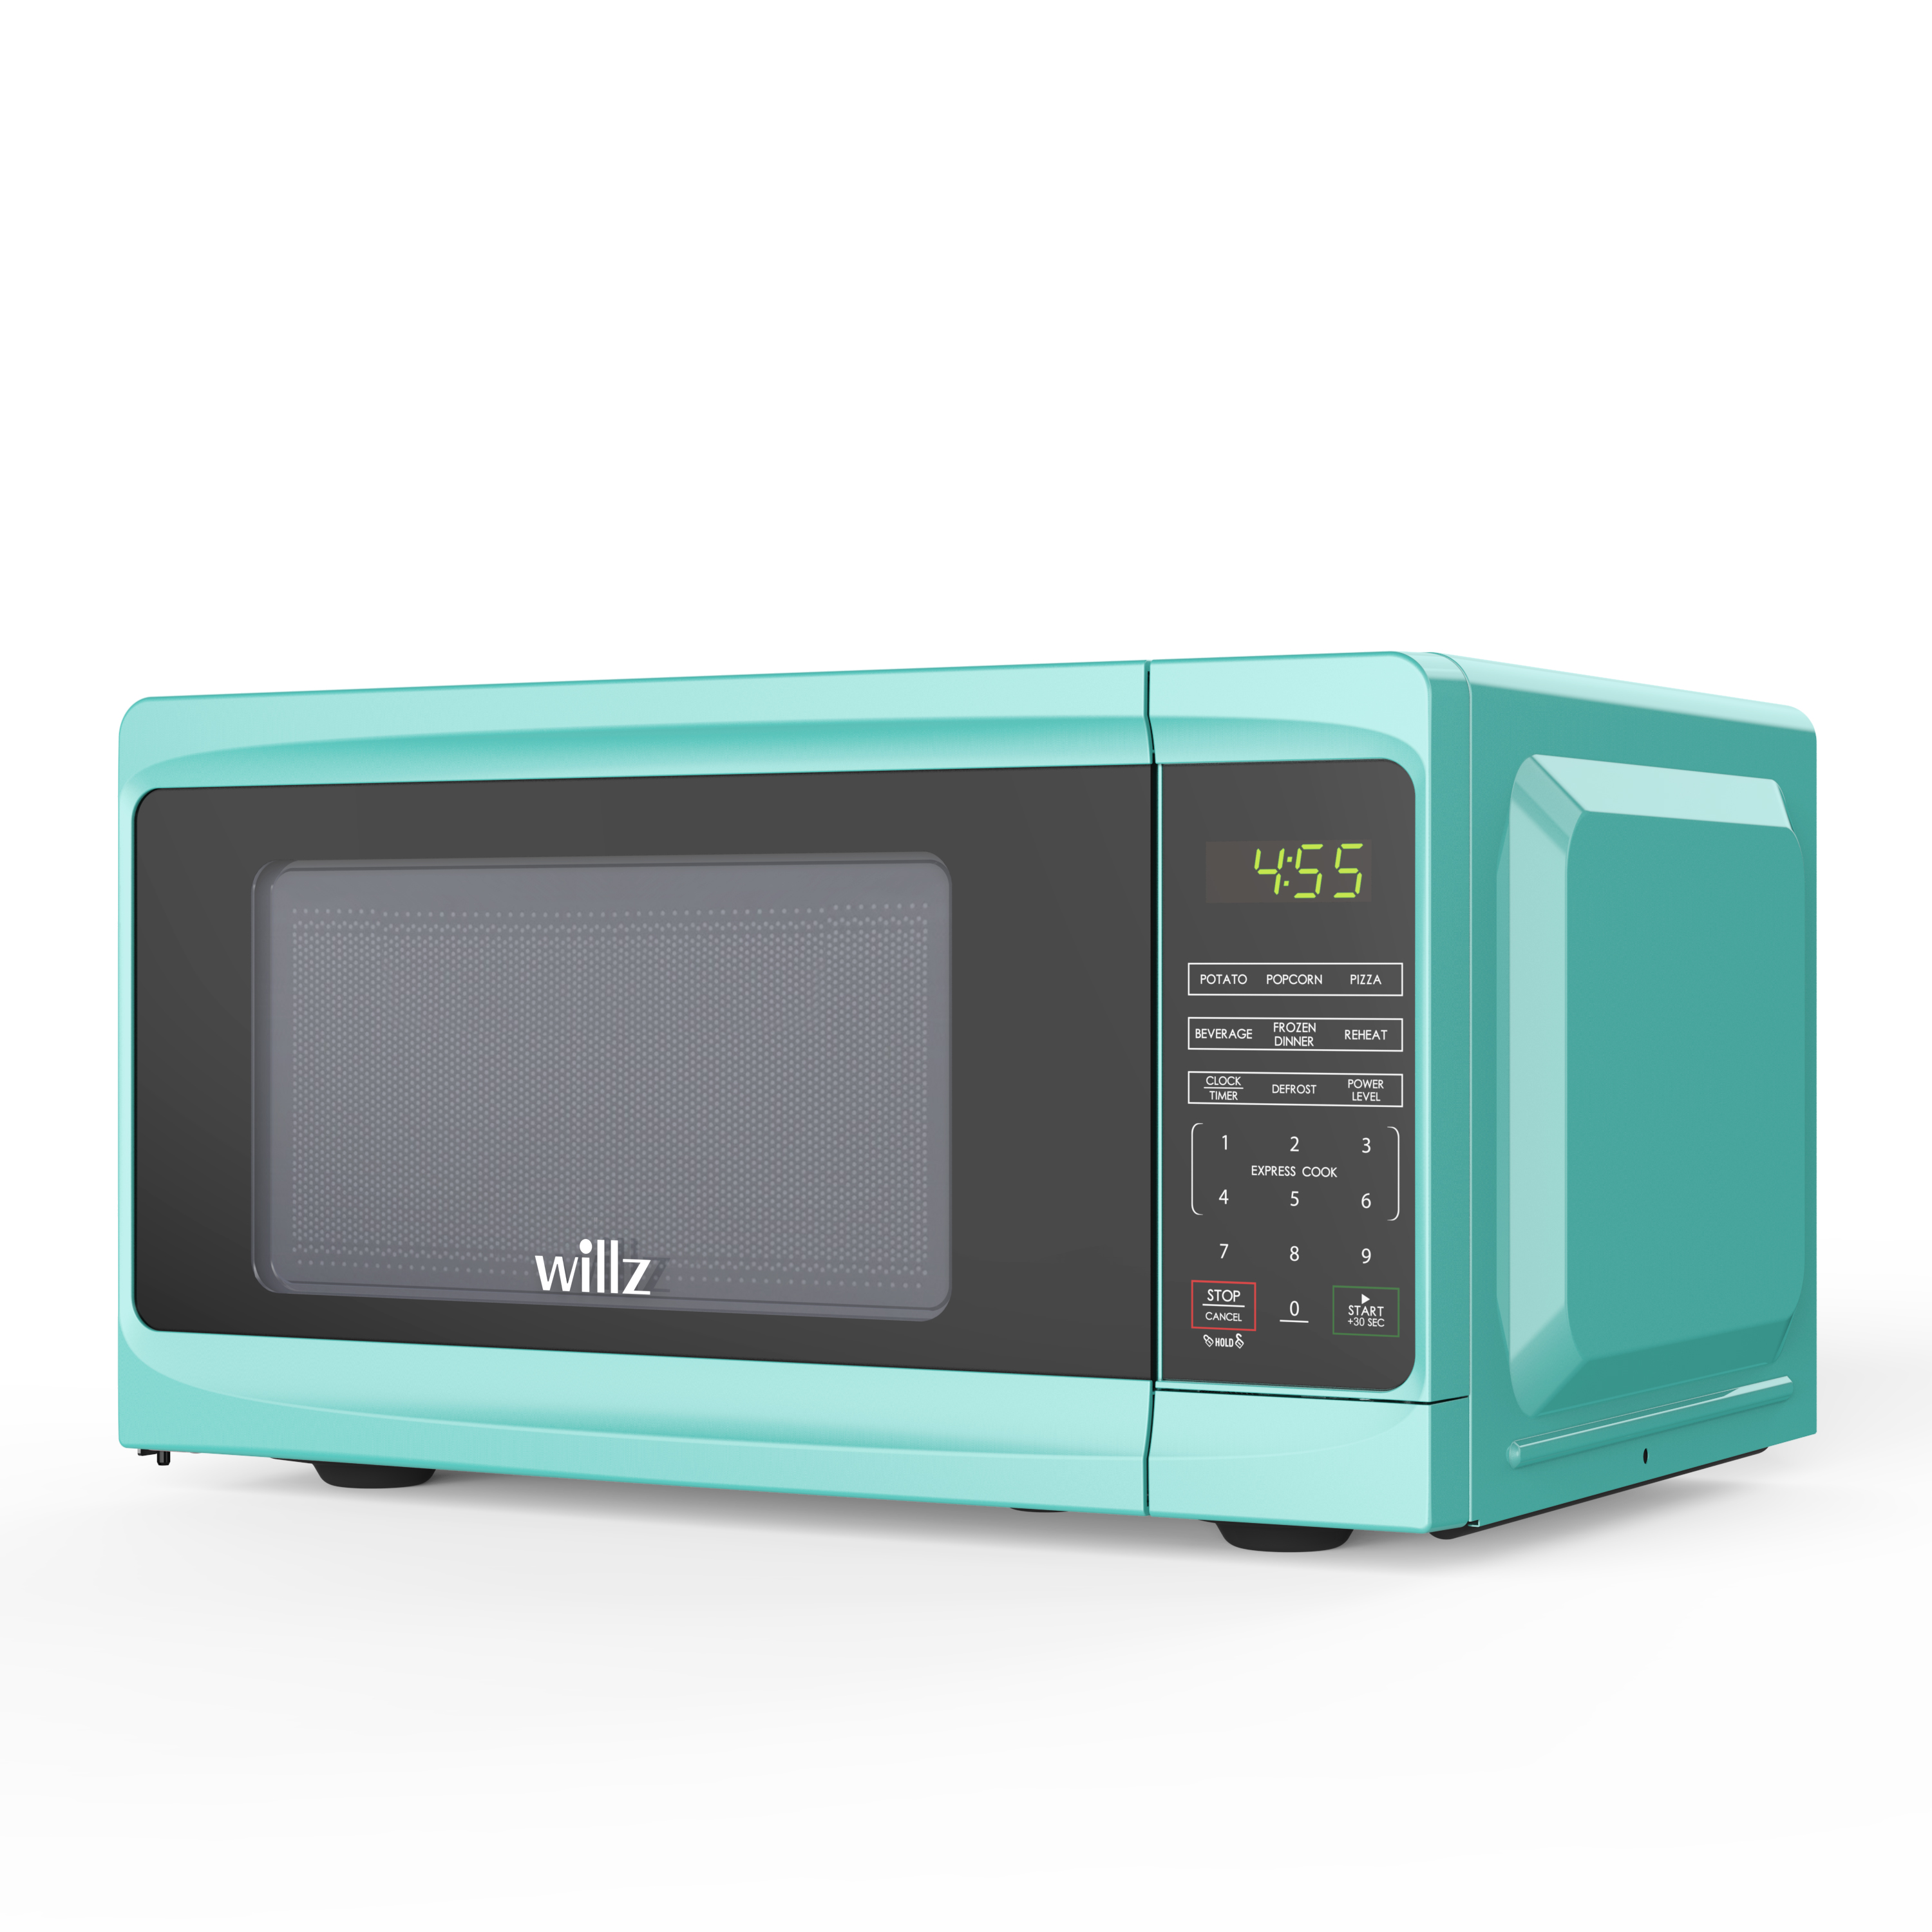 Willz WLCMV807GN-07 0.7 Cu.Ft. Countertop Microwave Oven, Green - image 2 of 7